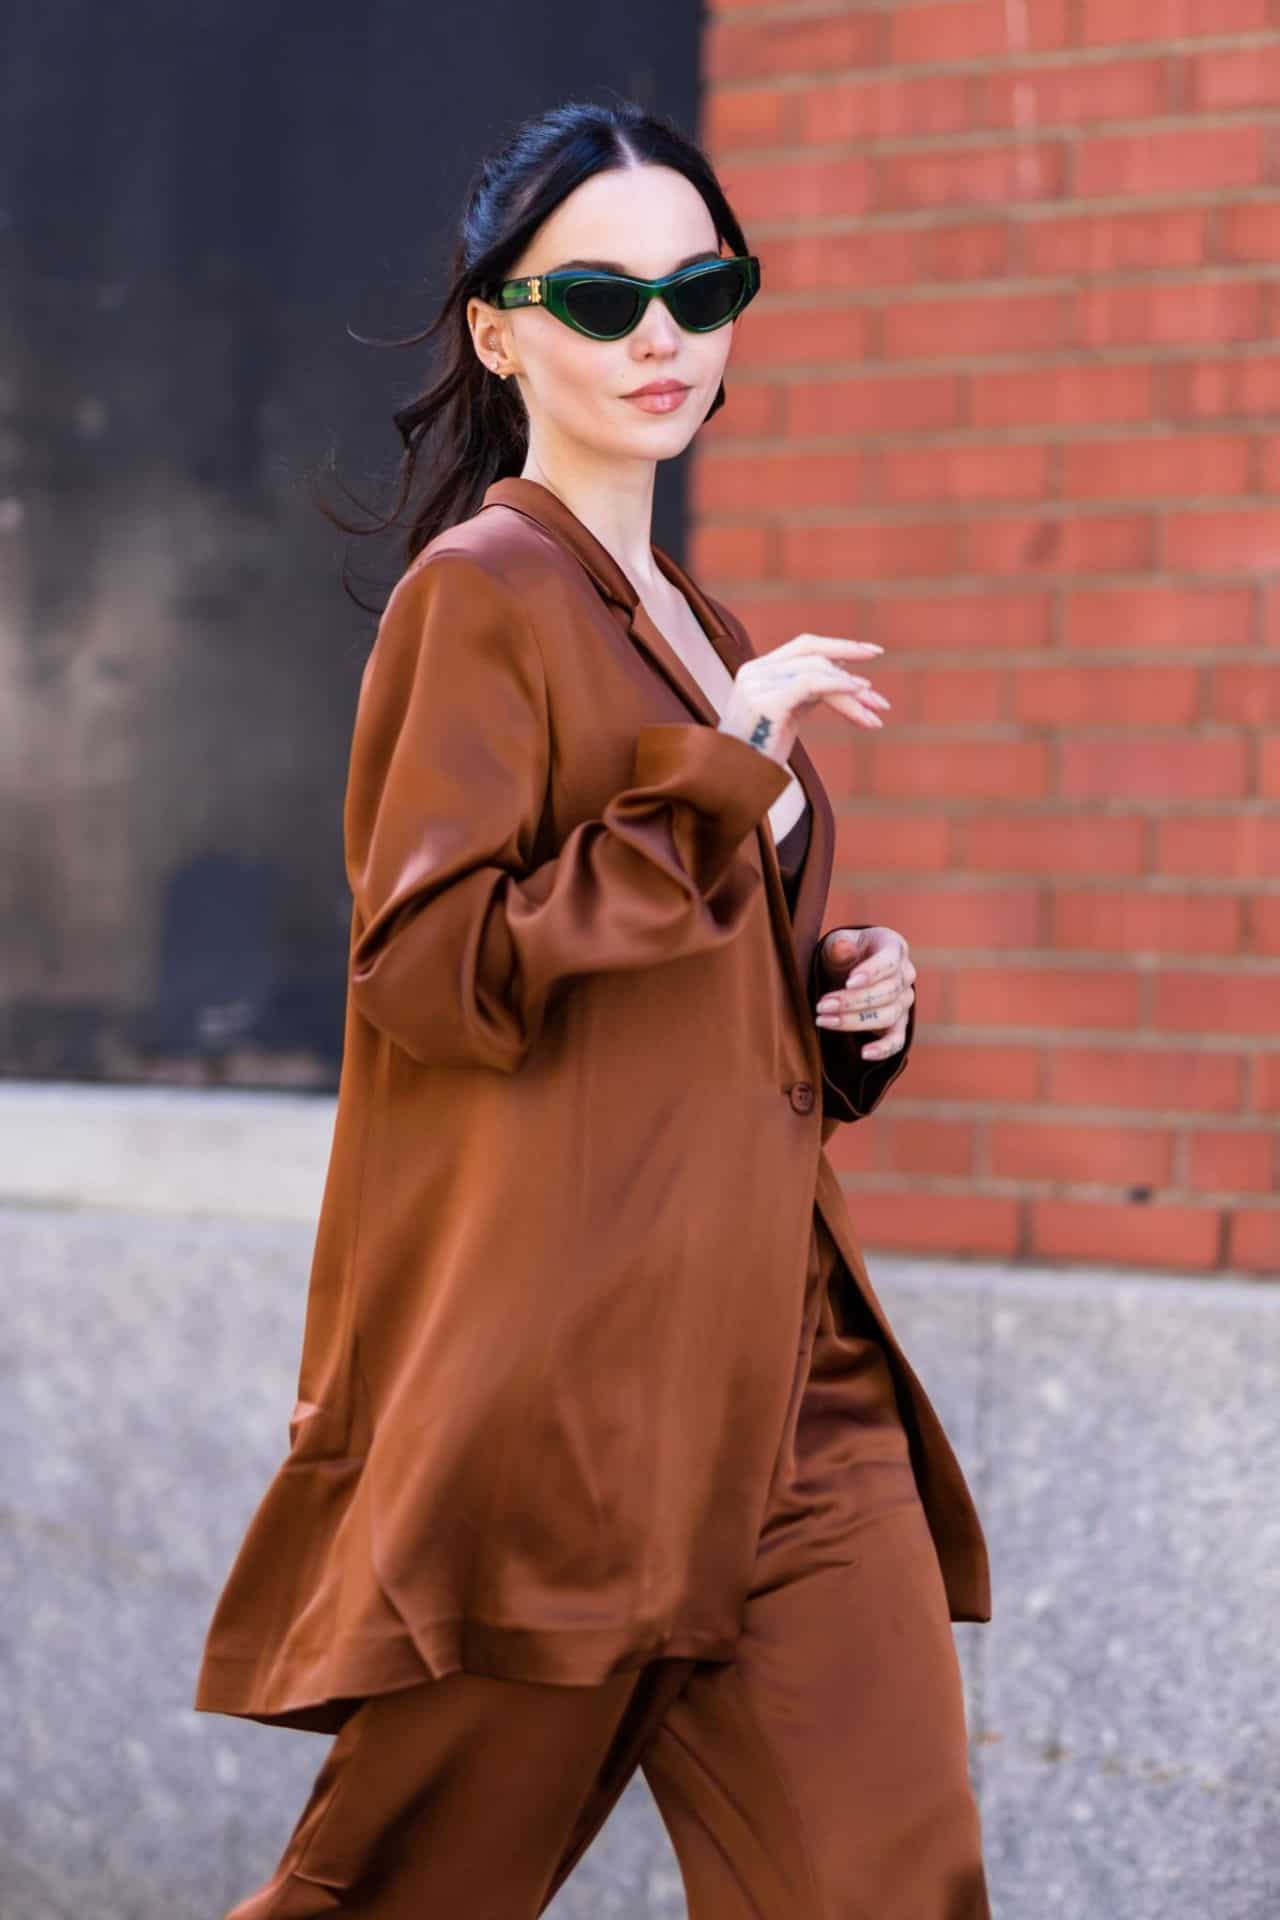 Dove Cameron Nails the Chic Look in Bronze Pantsuit in New York City